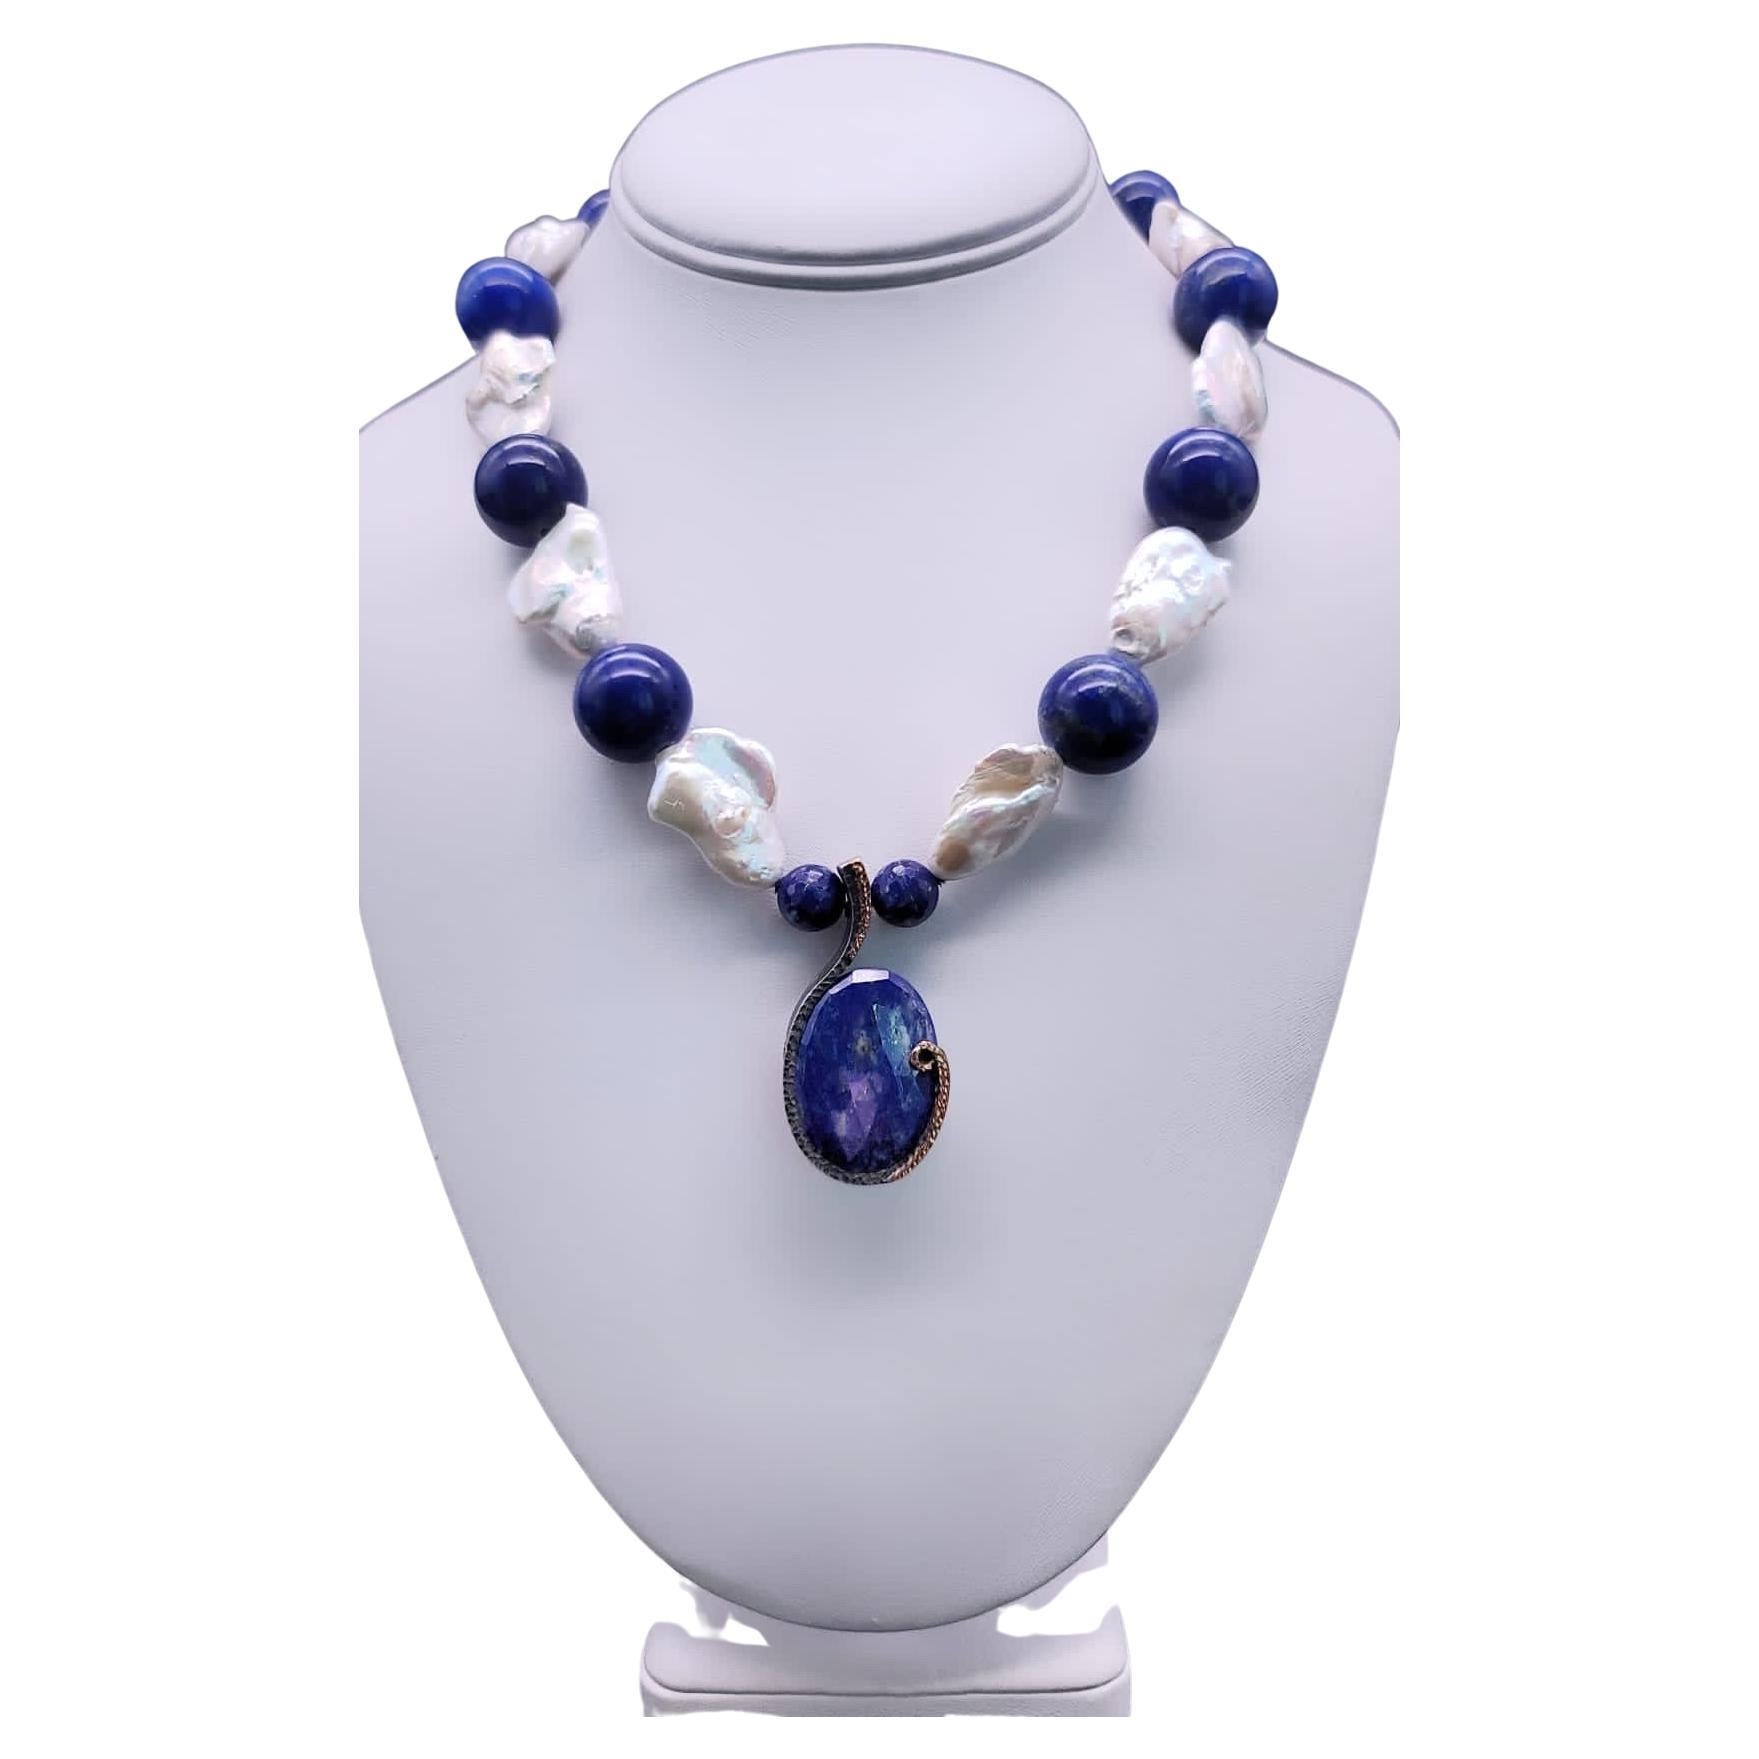 A.Jeschel Stunning Lapis and Baroque Pearls necklace. For Sale